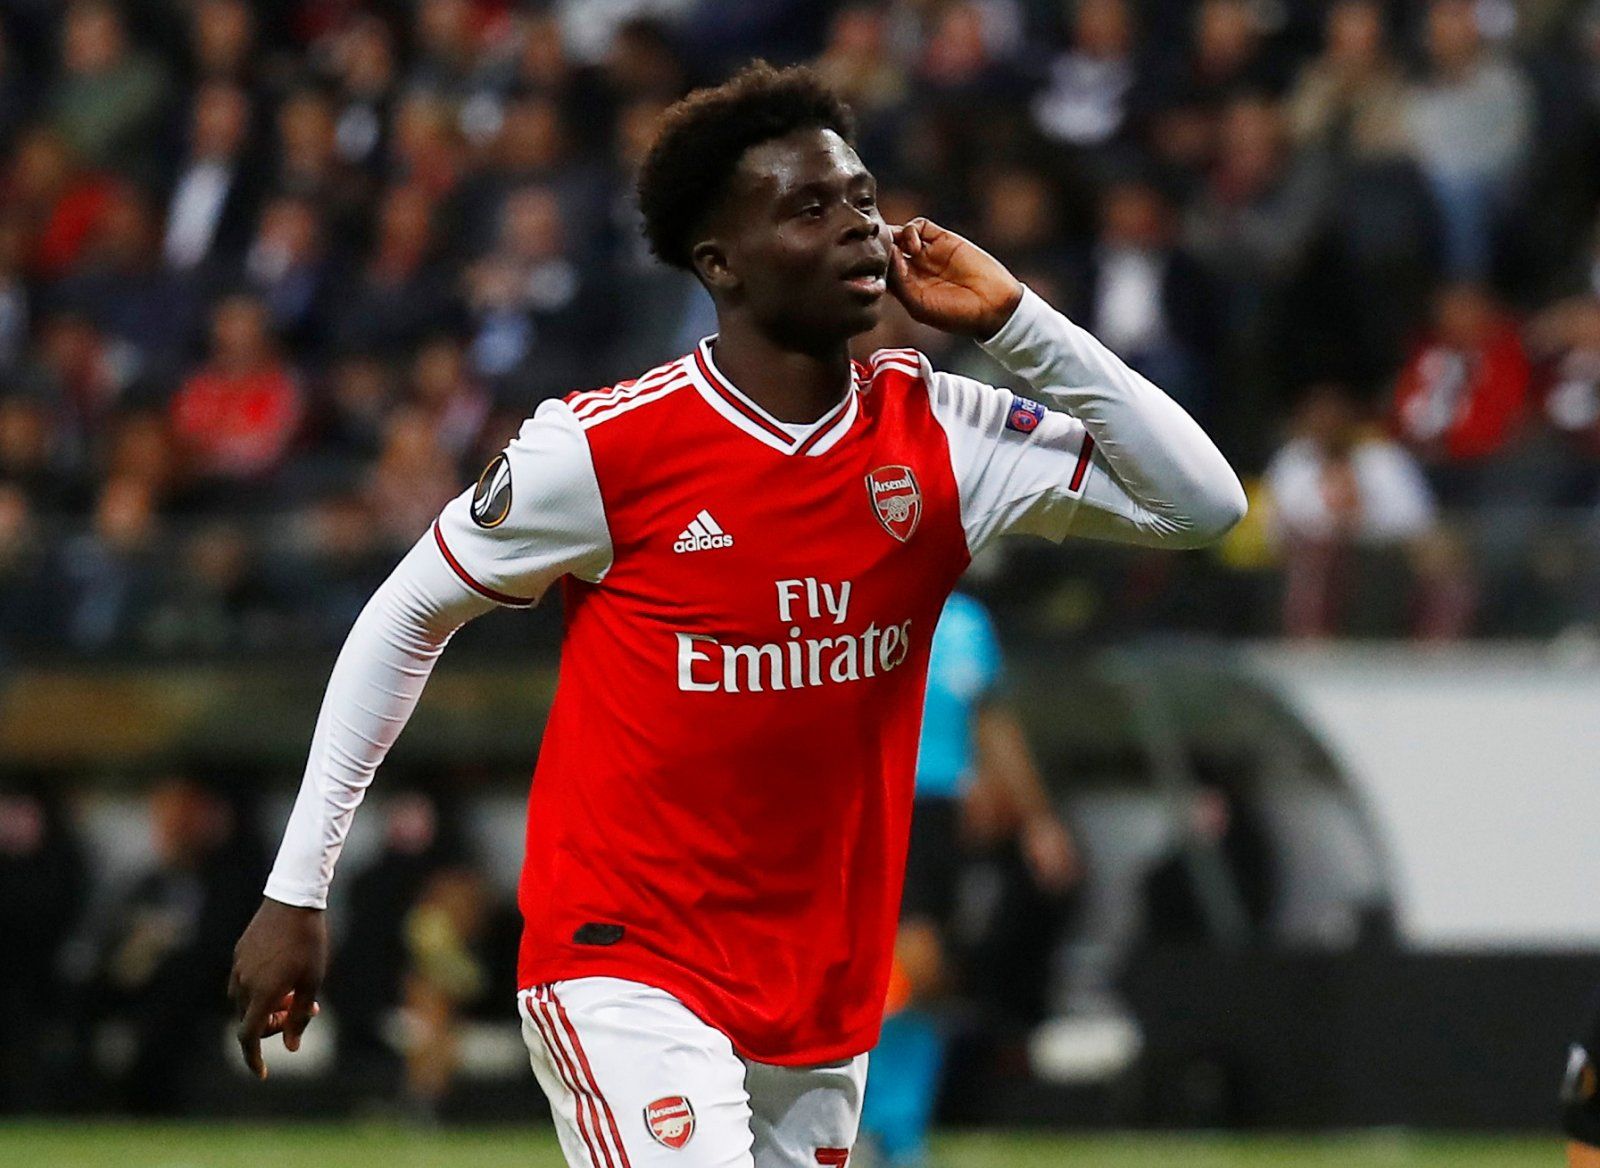 Liverpool: Paddy Kenny claims Bukayo Saka could be tempted into Reds move -Liverpool News